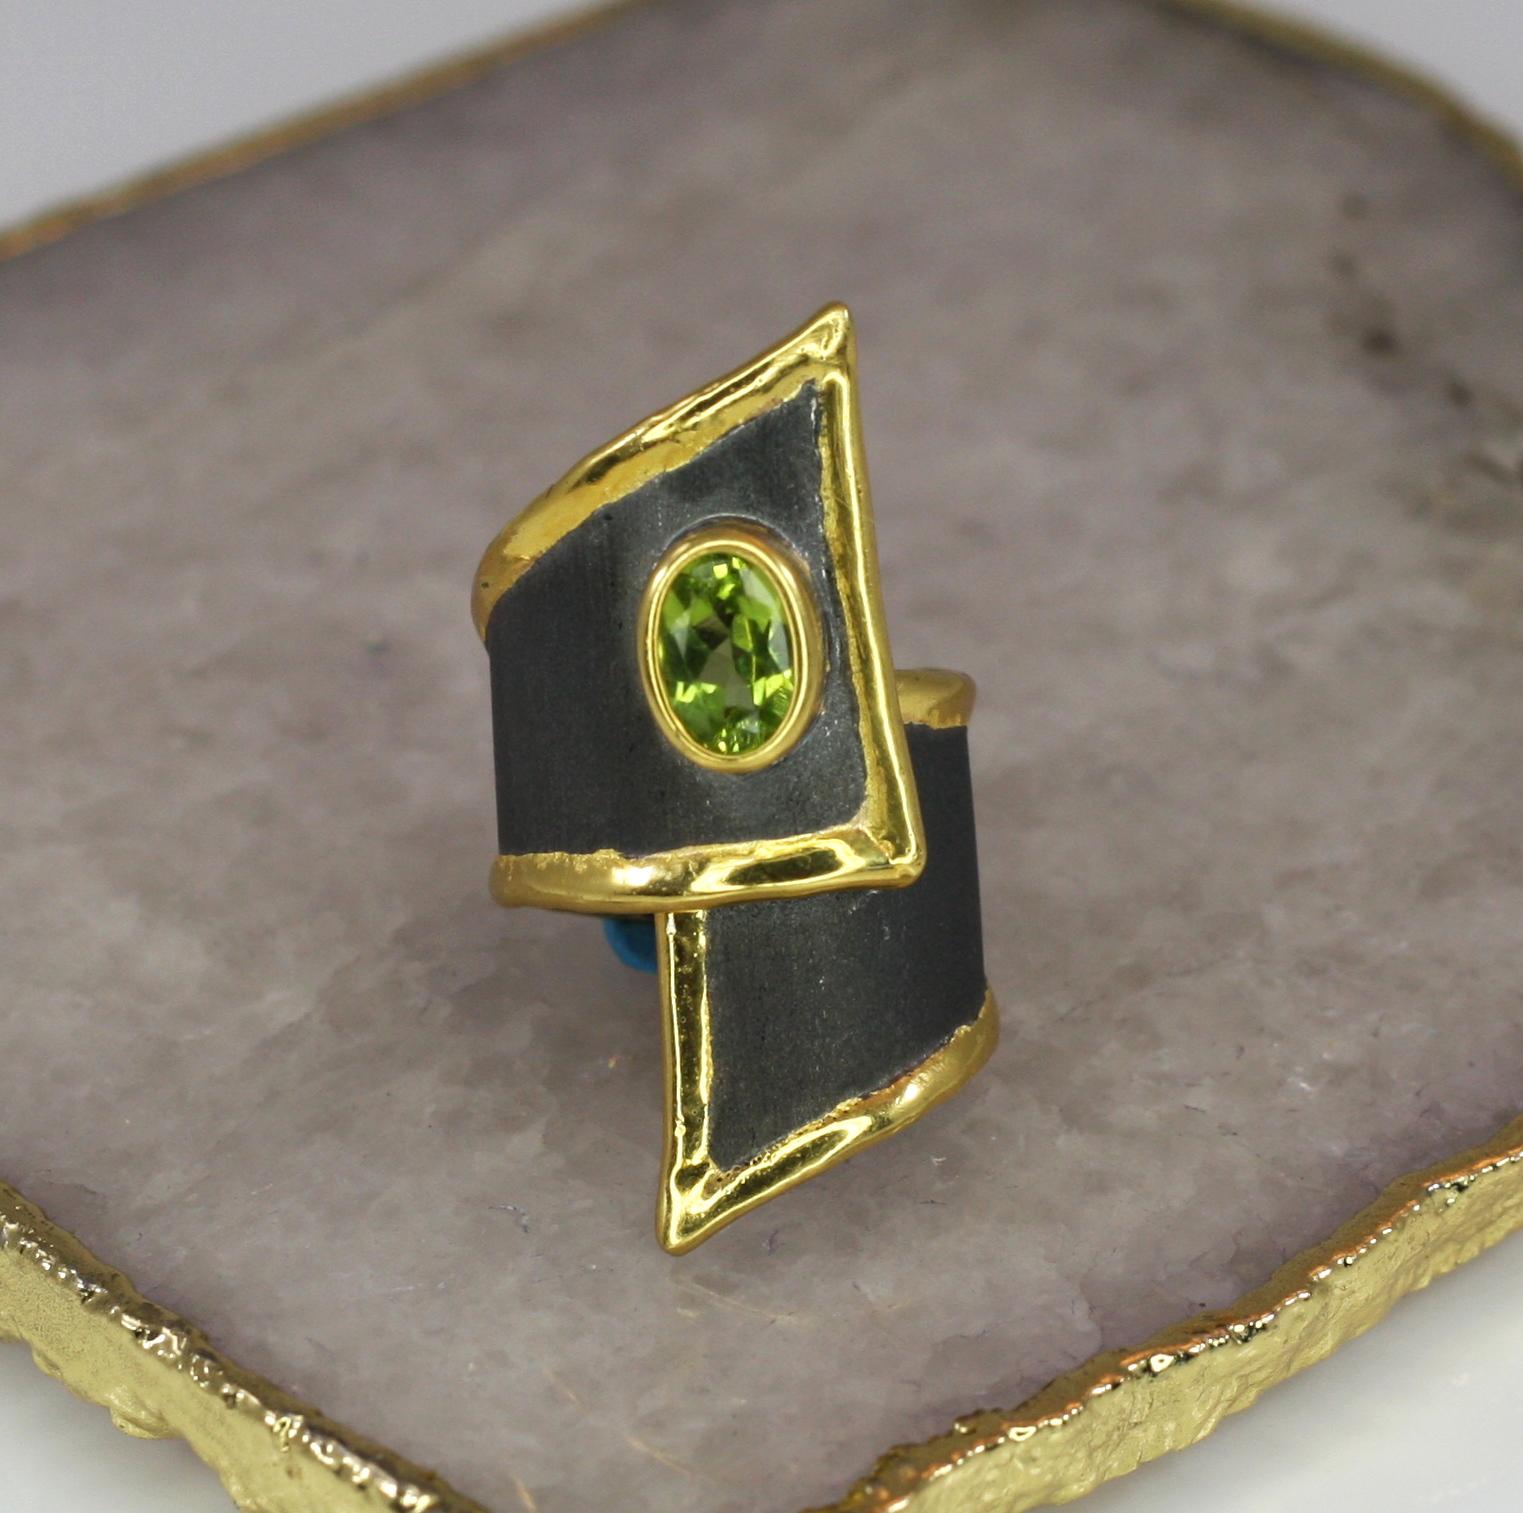 Yianni Creations presents exclusively the new Eclyps Collection. This is a handmade artisan ring from fine silver 950 purity plated with black rhodium and Pure Gold. This wide asymmetrical ring features a 1.35 Carat oval cut Peridot on brushed